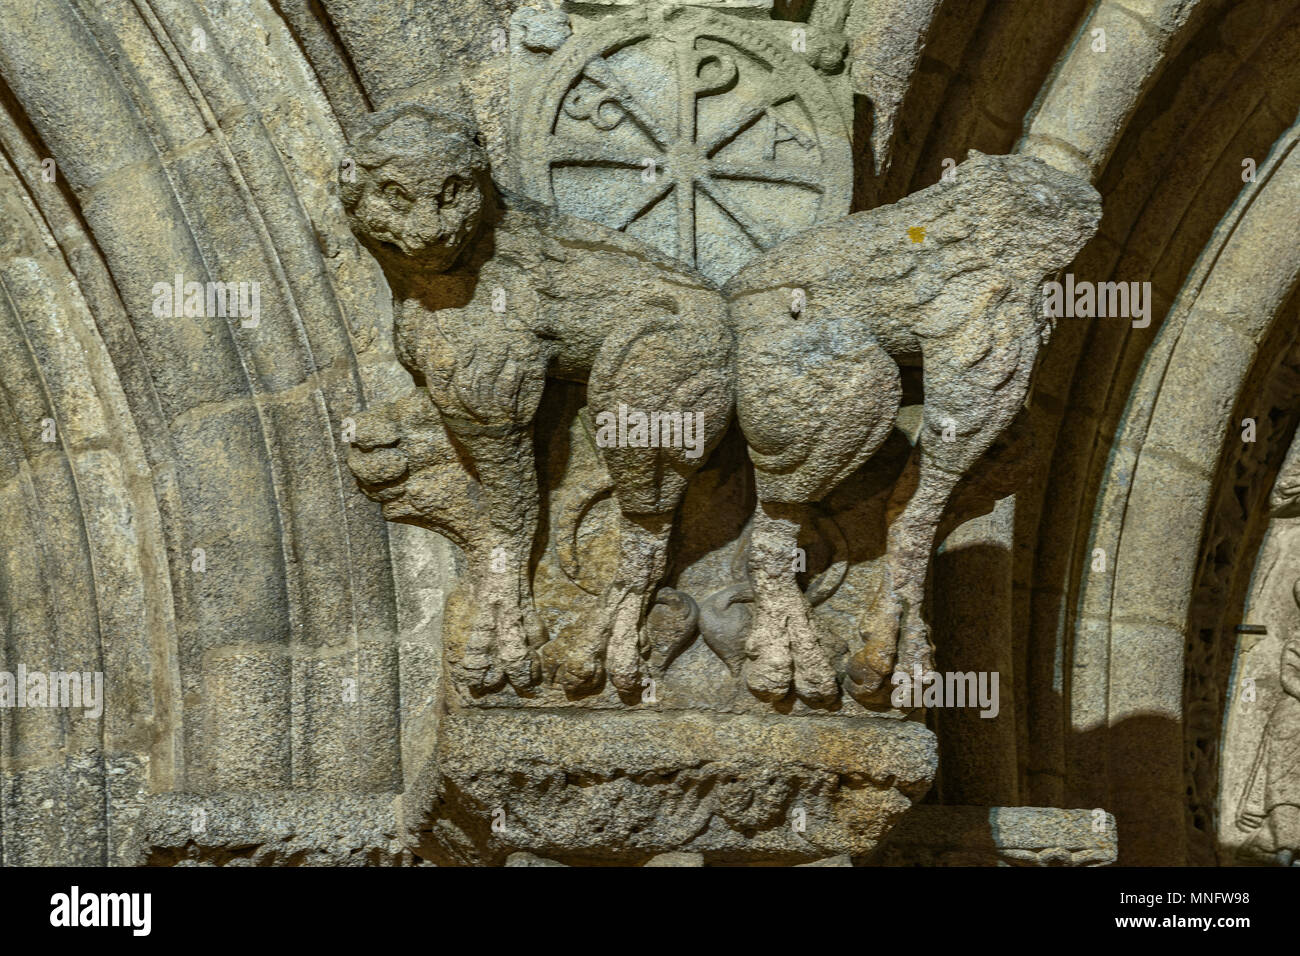 Chapiter of a column outside the cathedral of Santiago de Compostela Galicia, Spain Stock Photo